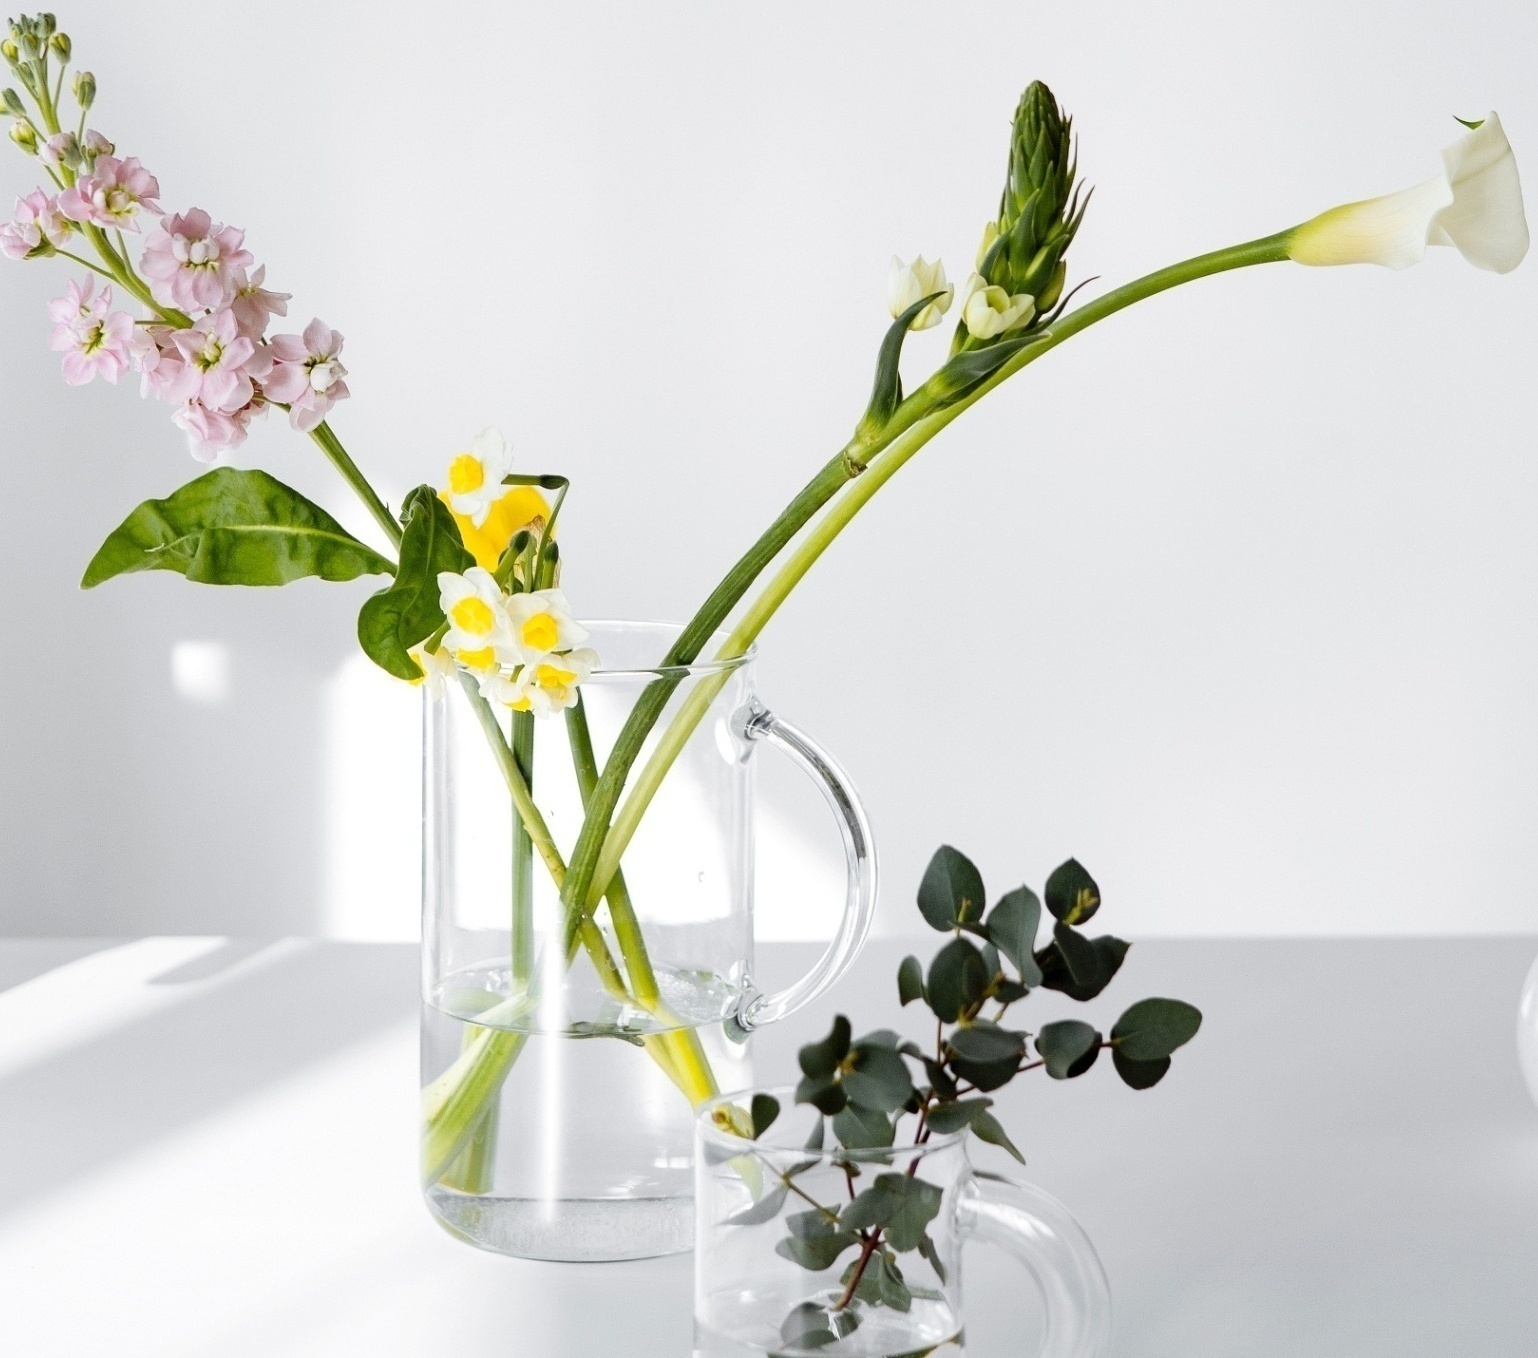 Image of pink, yellow, green, & white flowers in 2 glass pitchers. Get guidance with grief counseling in Winter Park, FL 33626. There are many paths you can take with grieving counseling in Winter Park, FL 33755. Our Orlando grief counselors will walk you through the process of grief therapy.